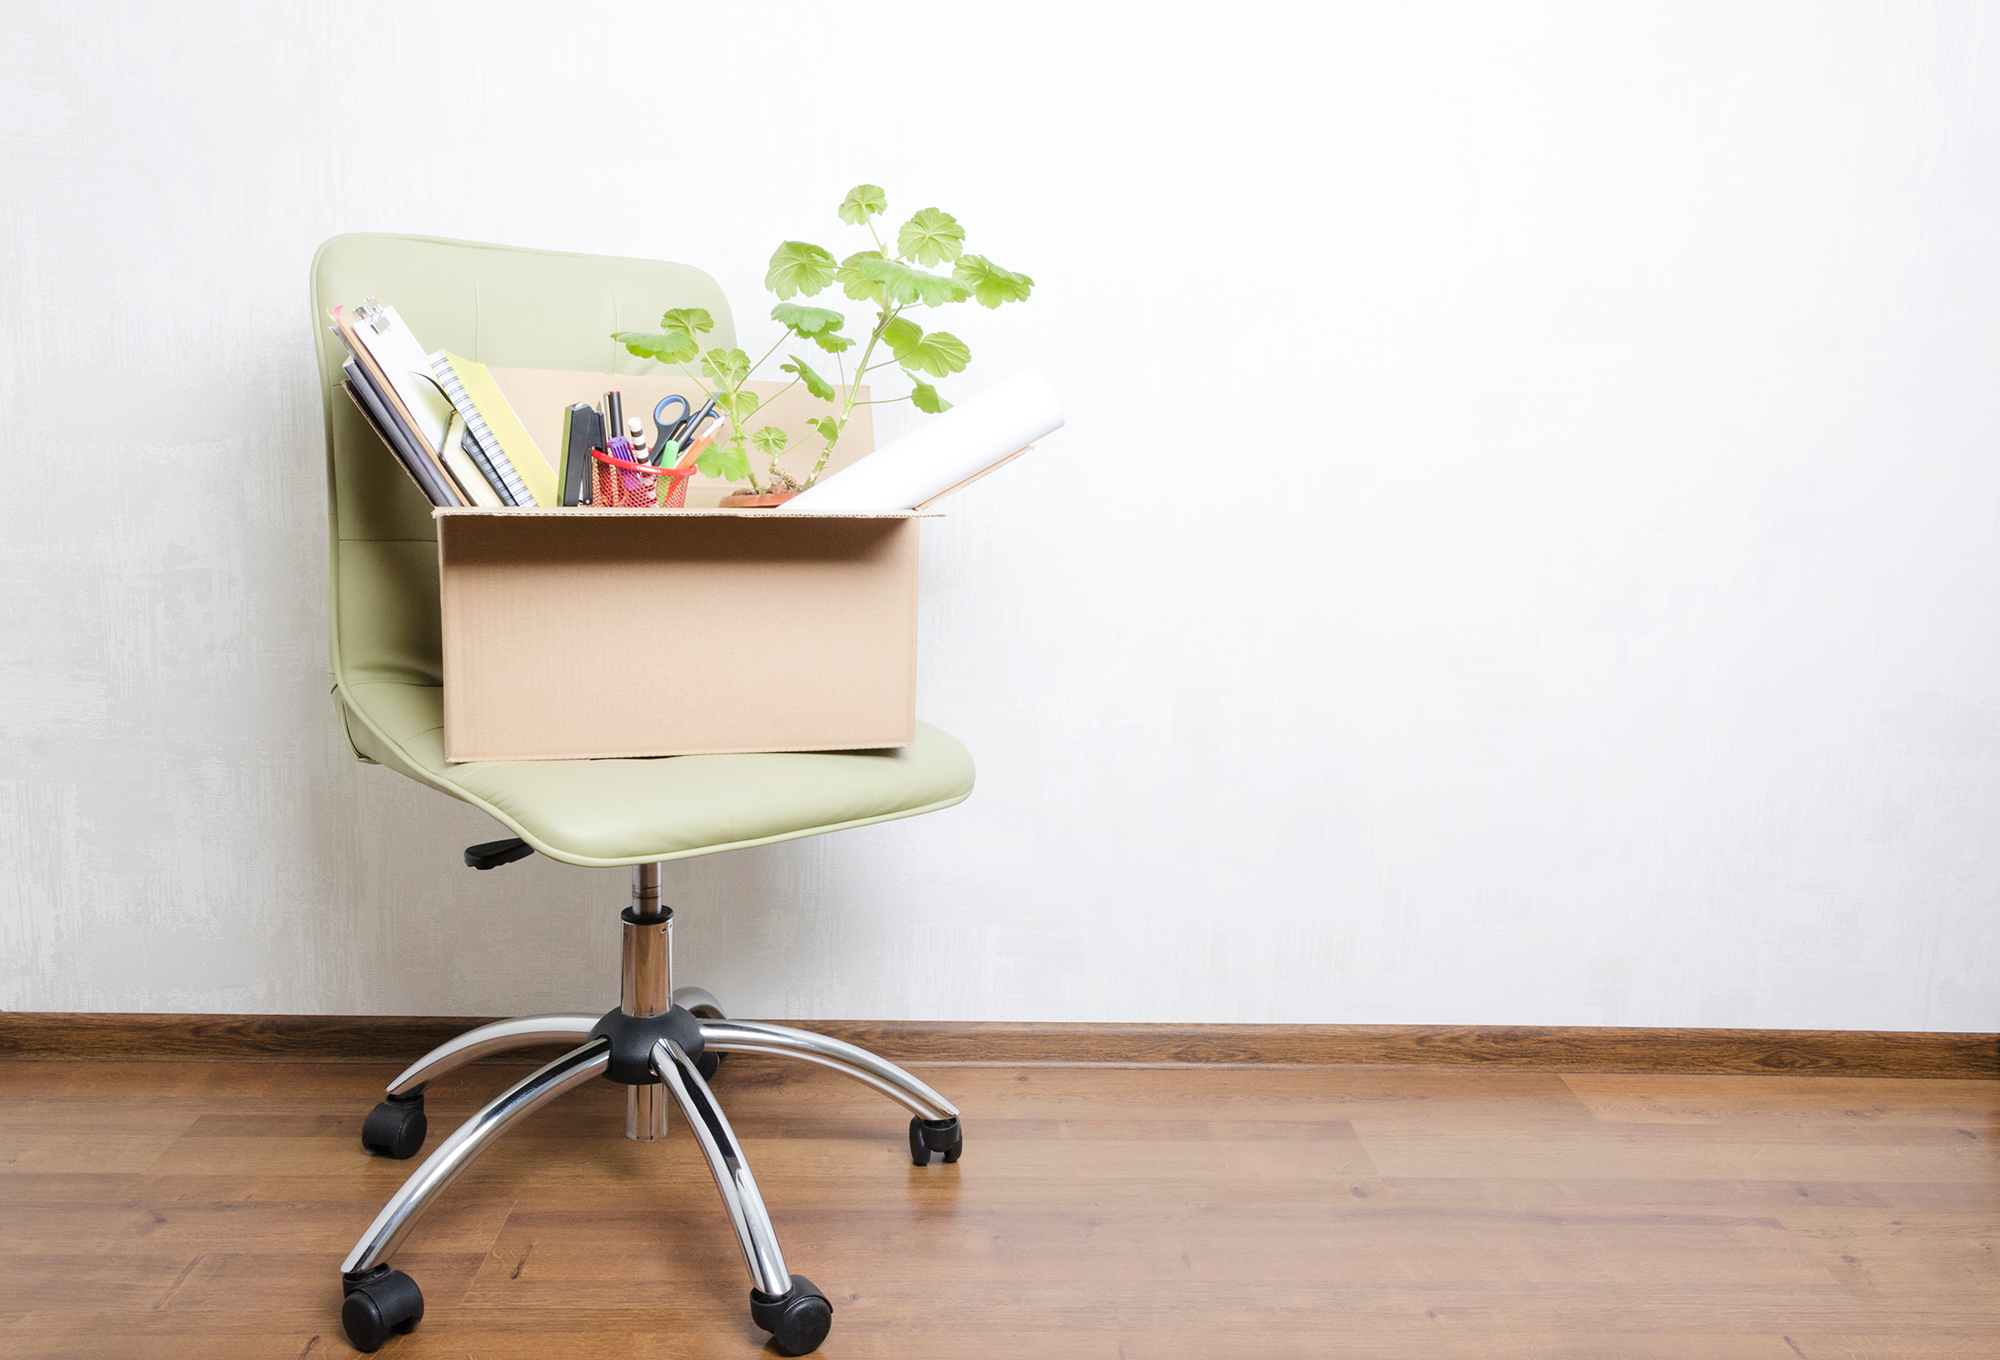 Chair with a box of items on it. (Image: Shutterstock)